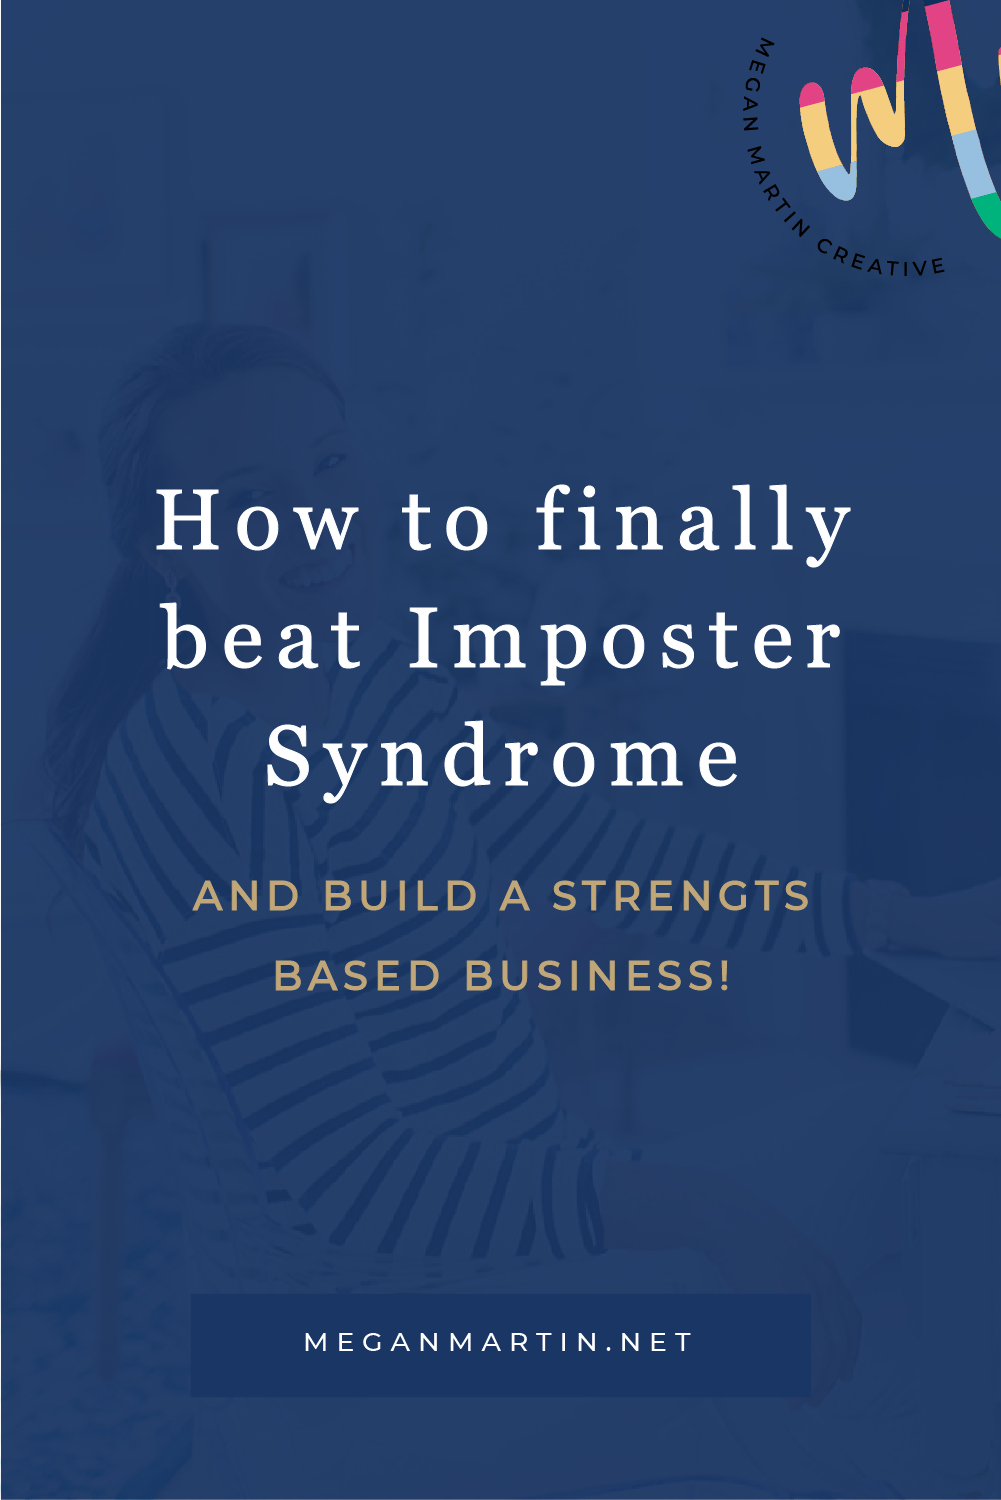 Overcome Imposter Syndrome in your small business